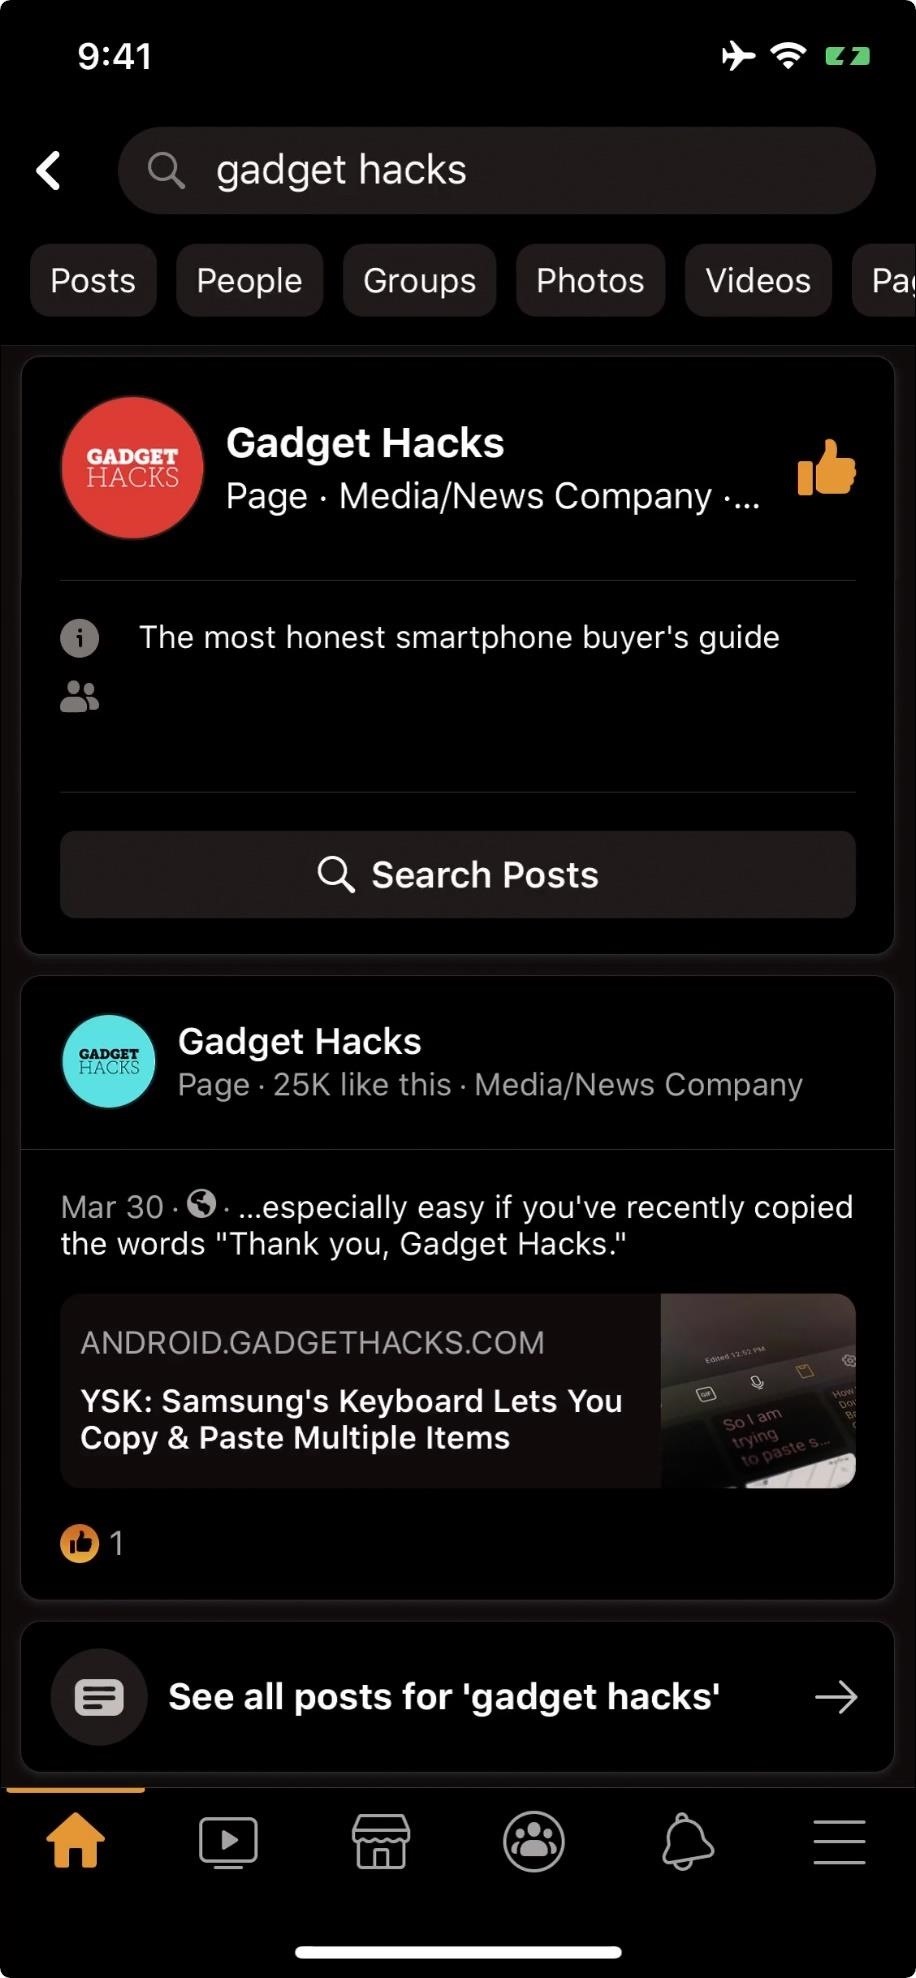 How to Enable Dark Mode in Facebook's iOS & Android Apps